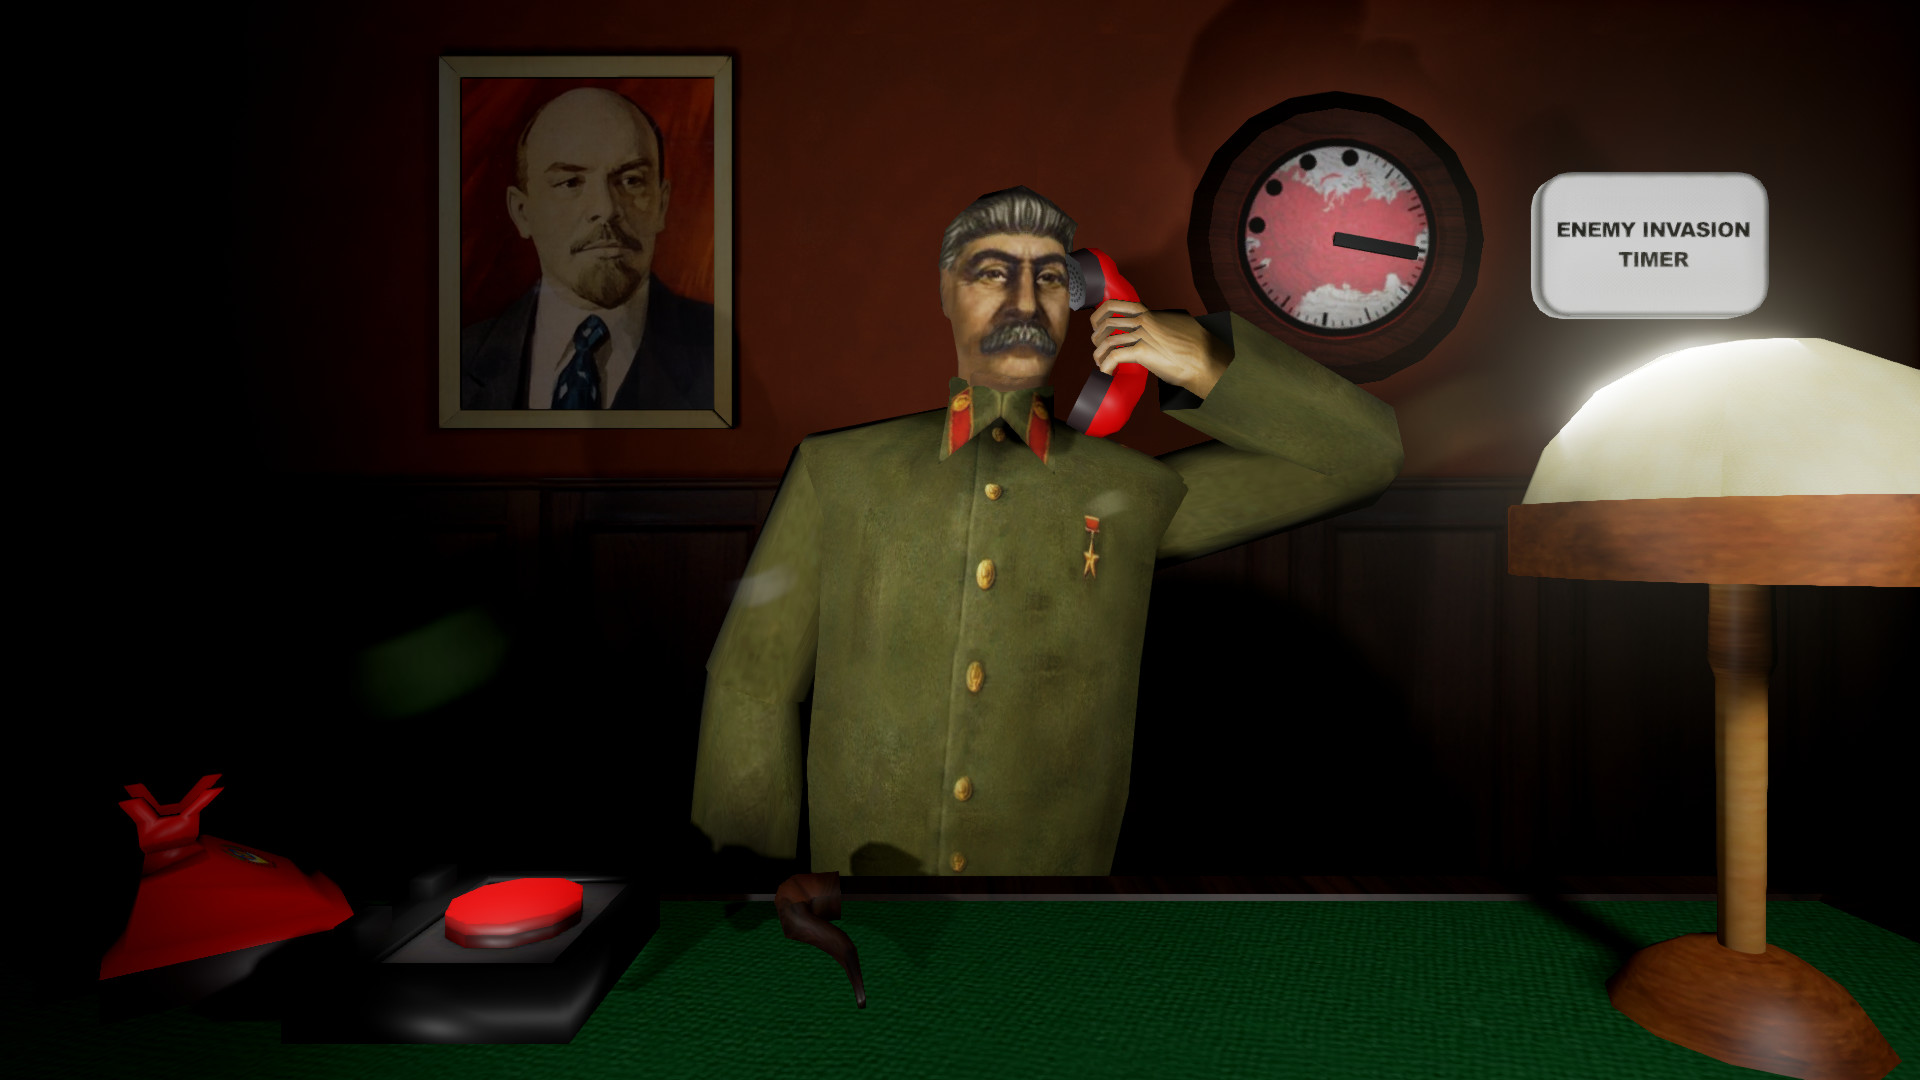 Calm Down, Stalin Free Download